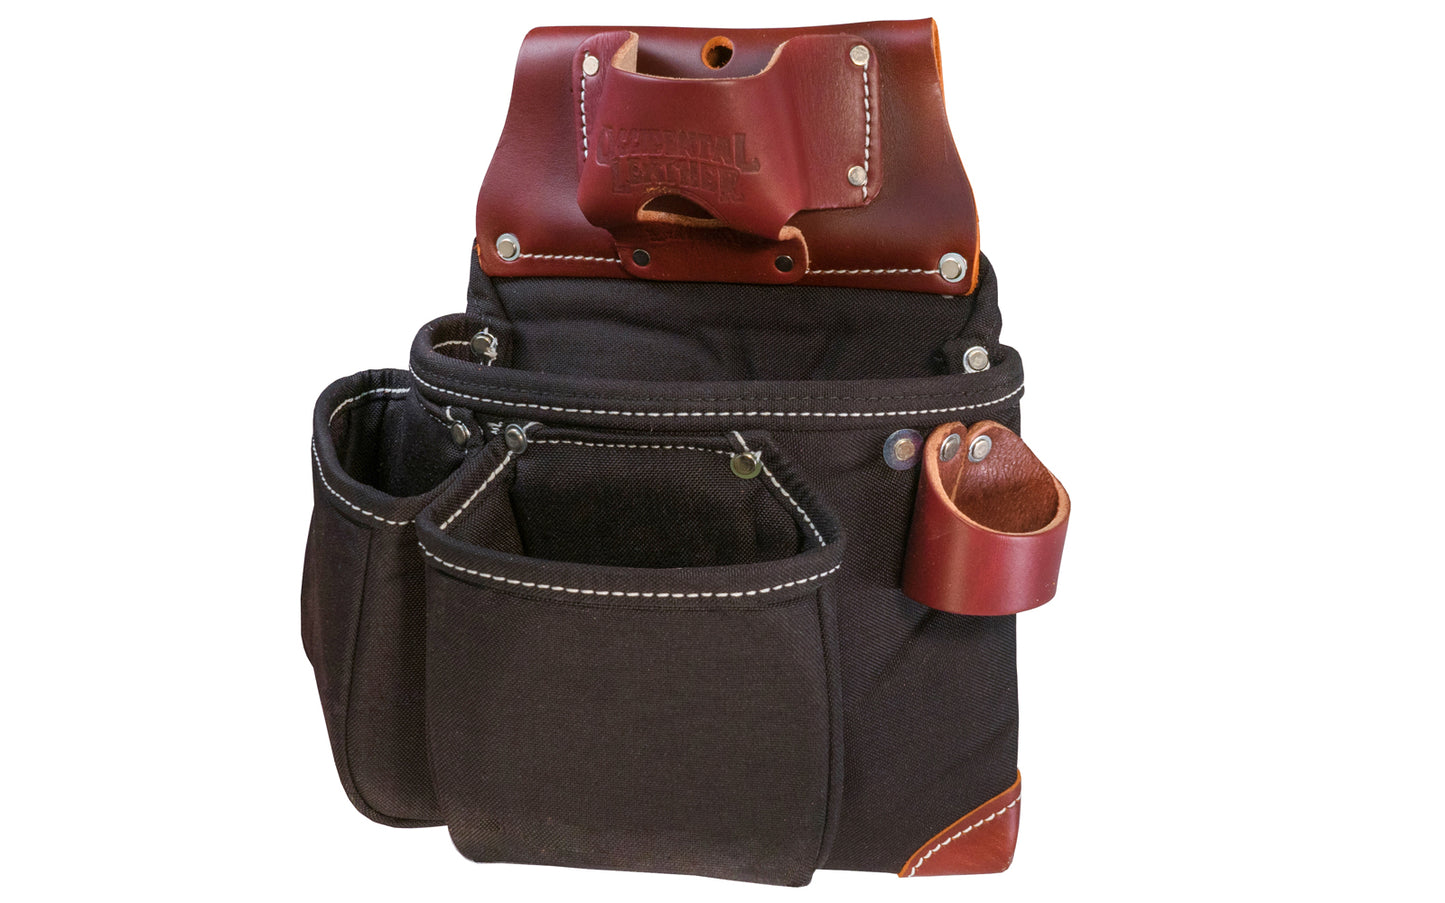 Occidental Leather 3-Pouch Tool Bag ~ B8018DB - Fits a 3" work belt - Pouch - Three pouch tool bag features holders for pencils, work knife, chisel, level, lumber crayon, hammer loop. Main tool bag corners are reinforced with Occidental's trademark "OxyRed" leather. Made of Nylon & genuine Leather - With Tape Pocket